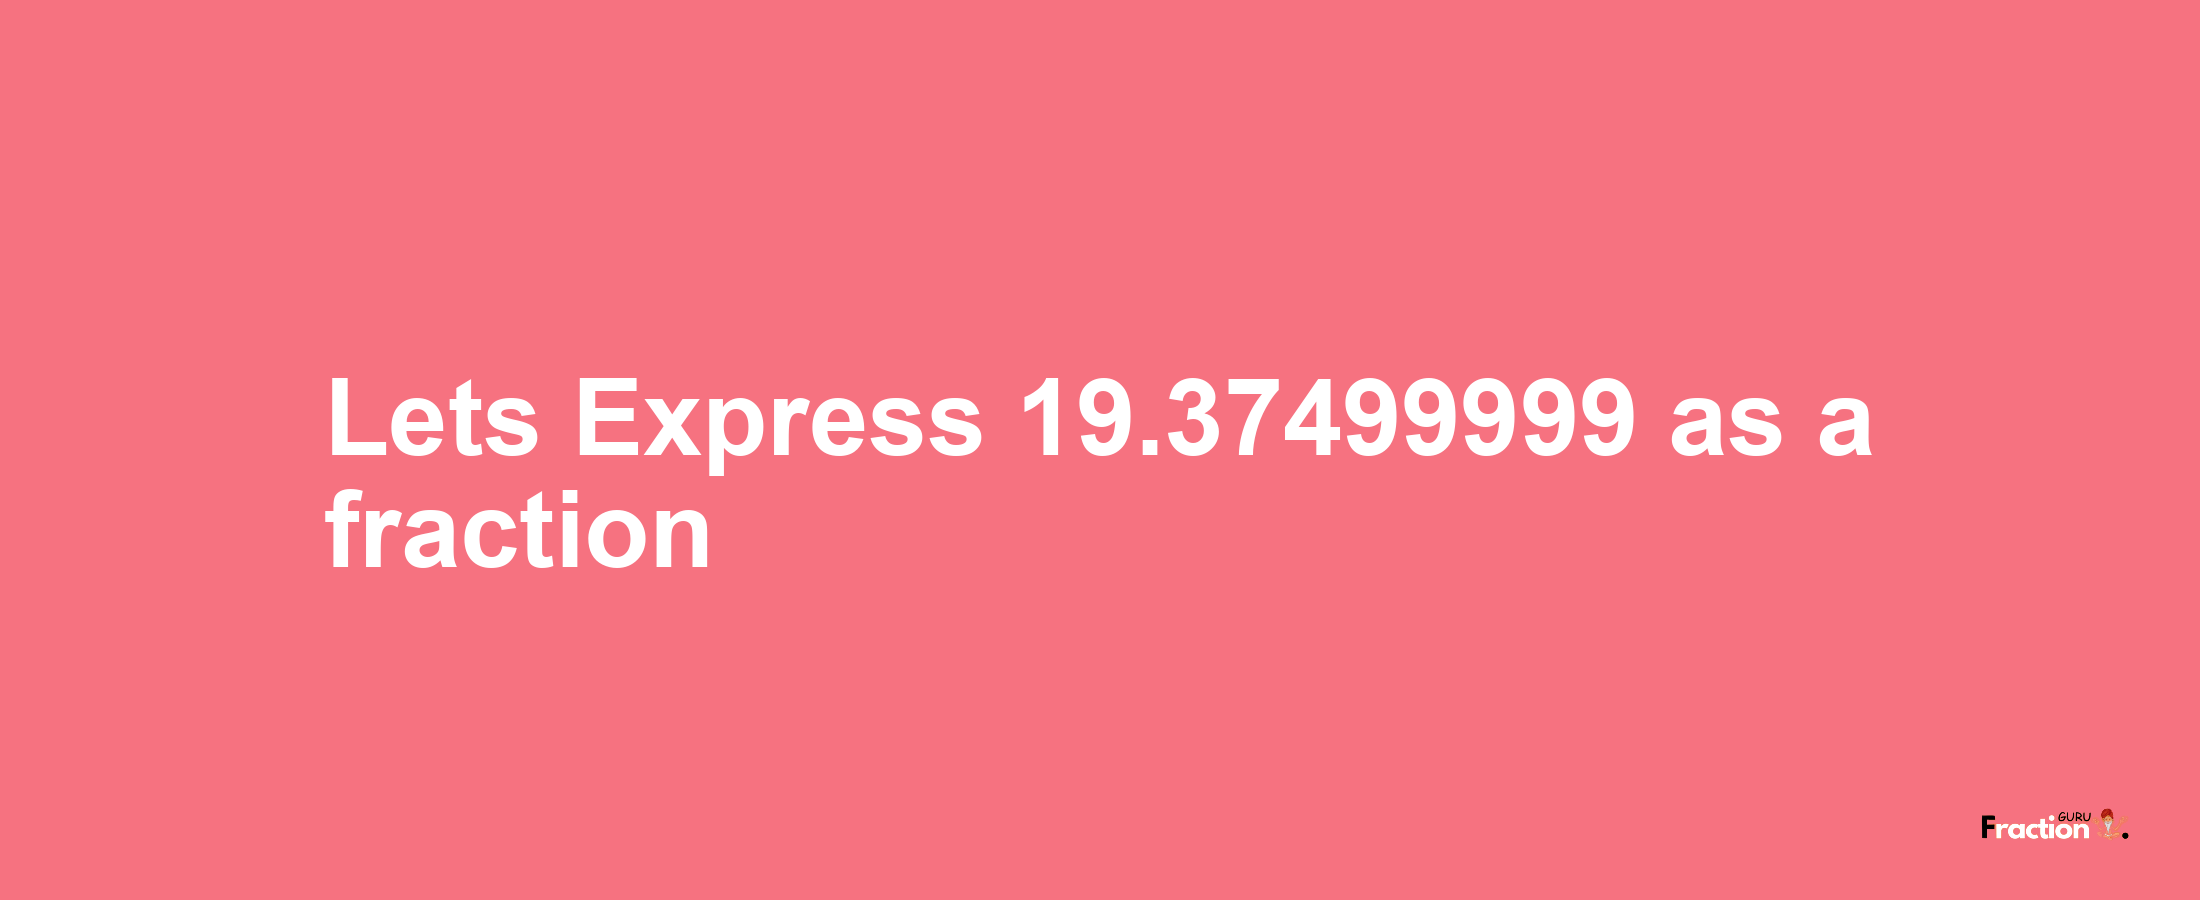 Lets Express 19.37499999 as afraction